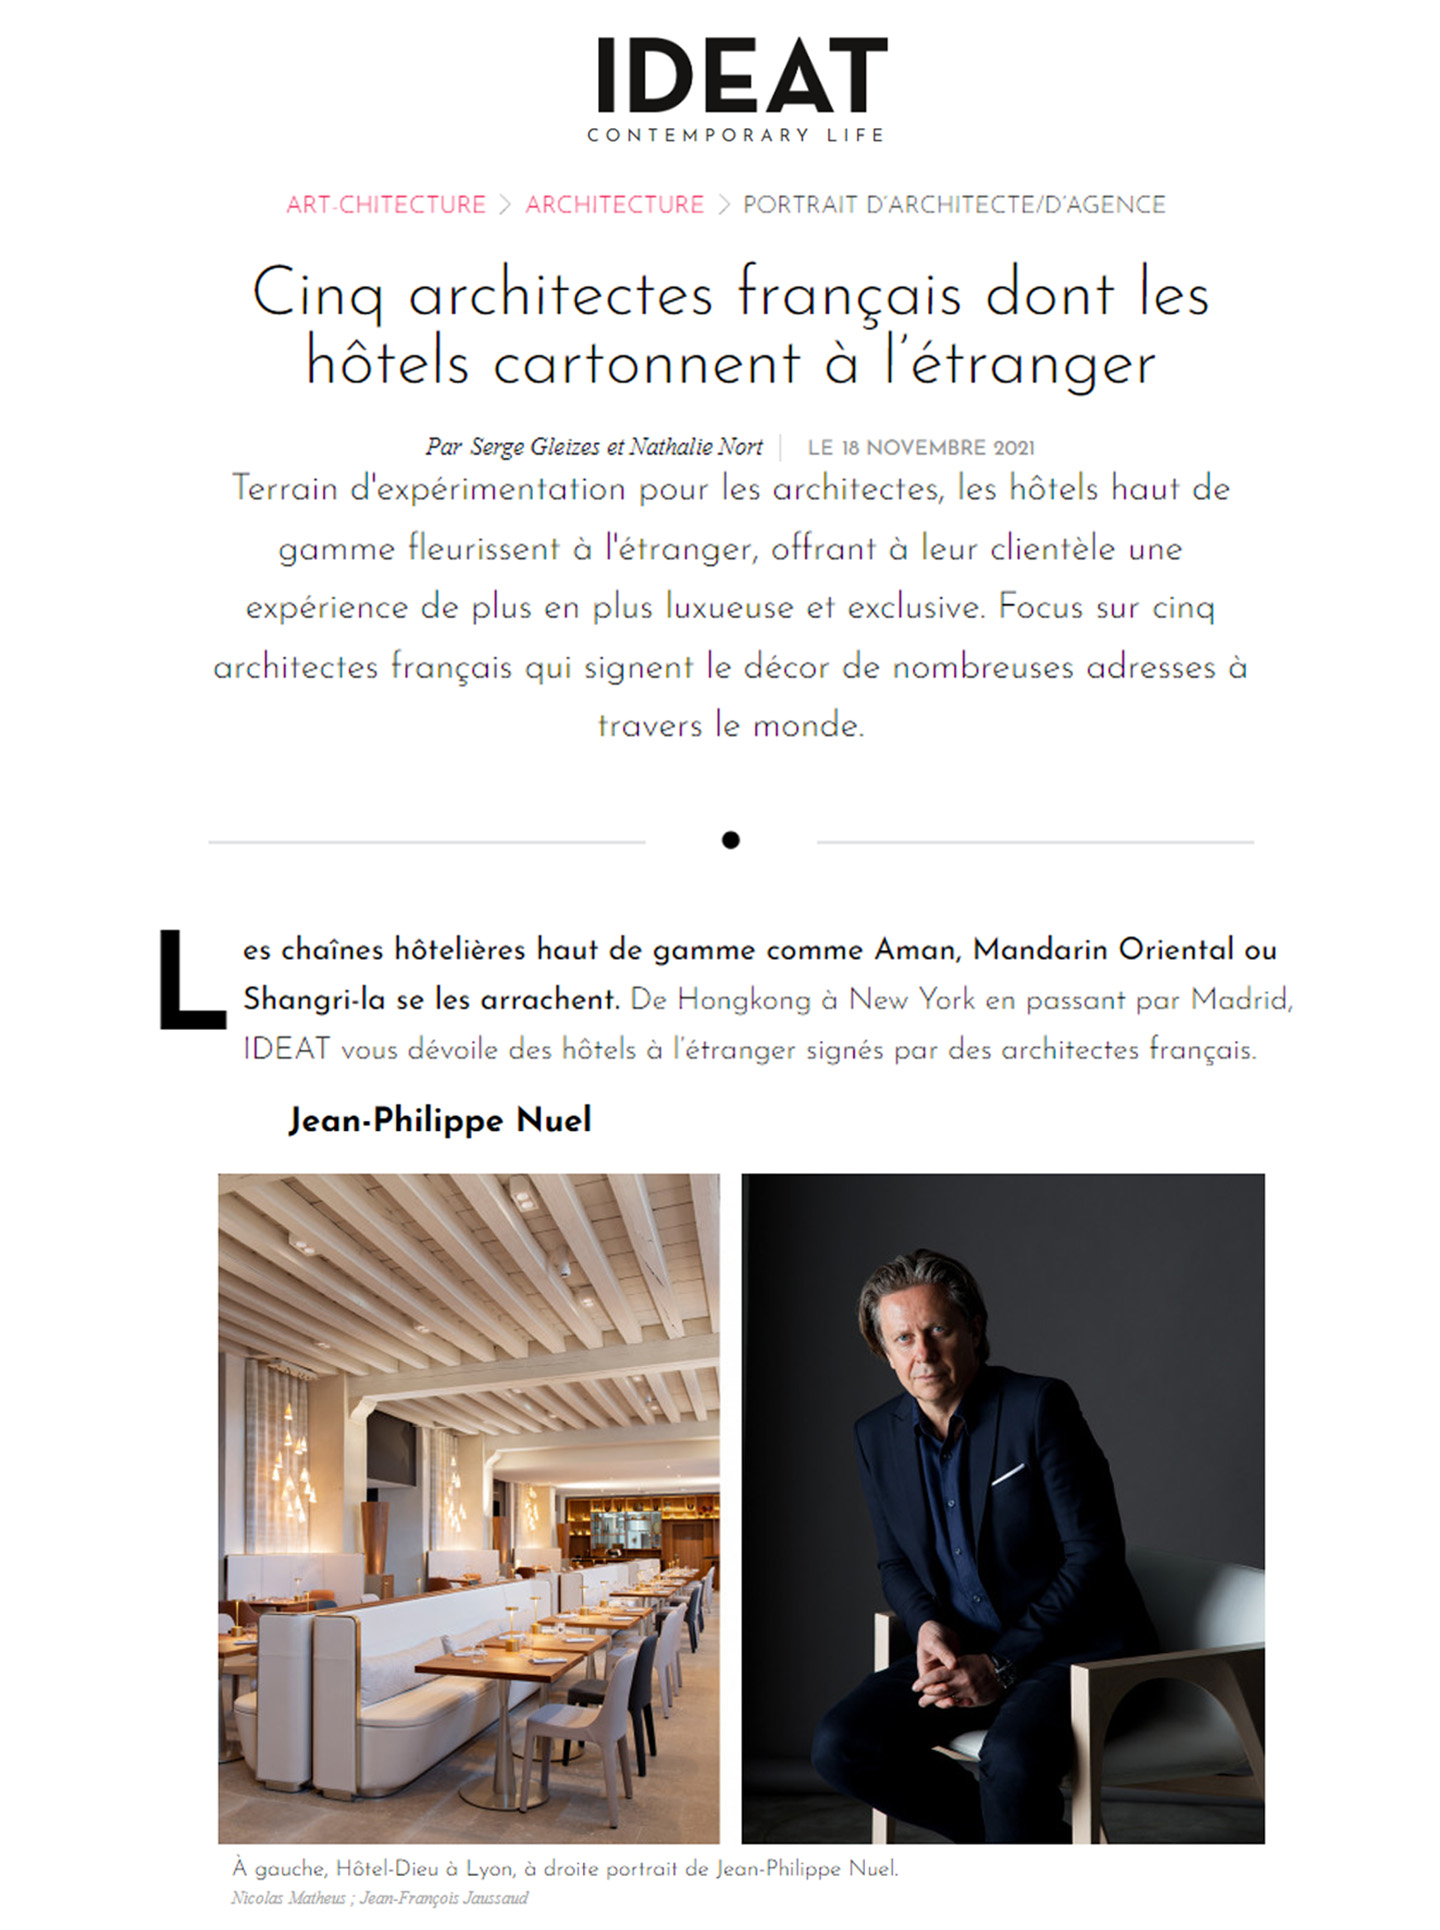 article on jean-philippe nuel and his achievements in interior design by ideat magazine, portrait